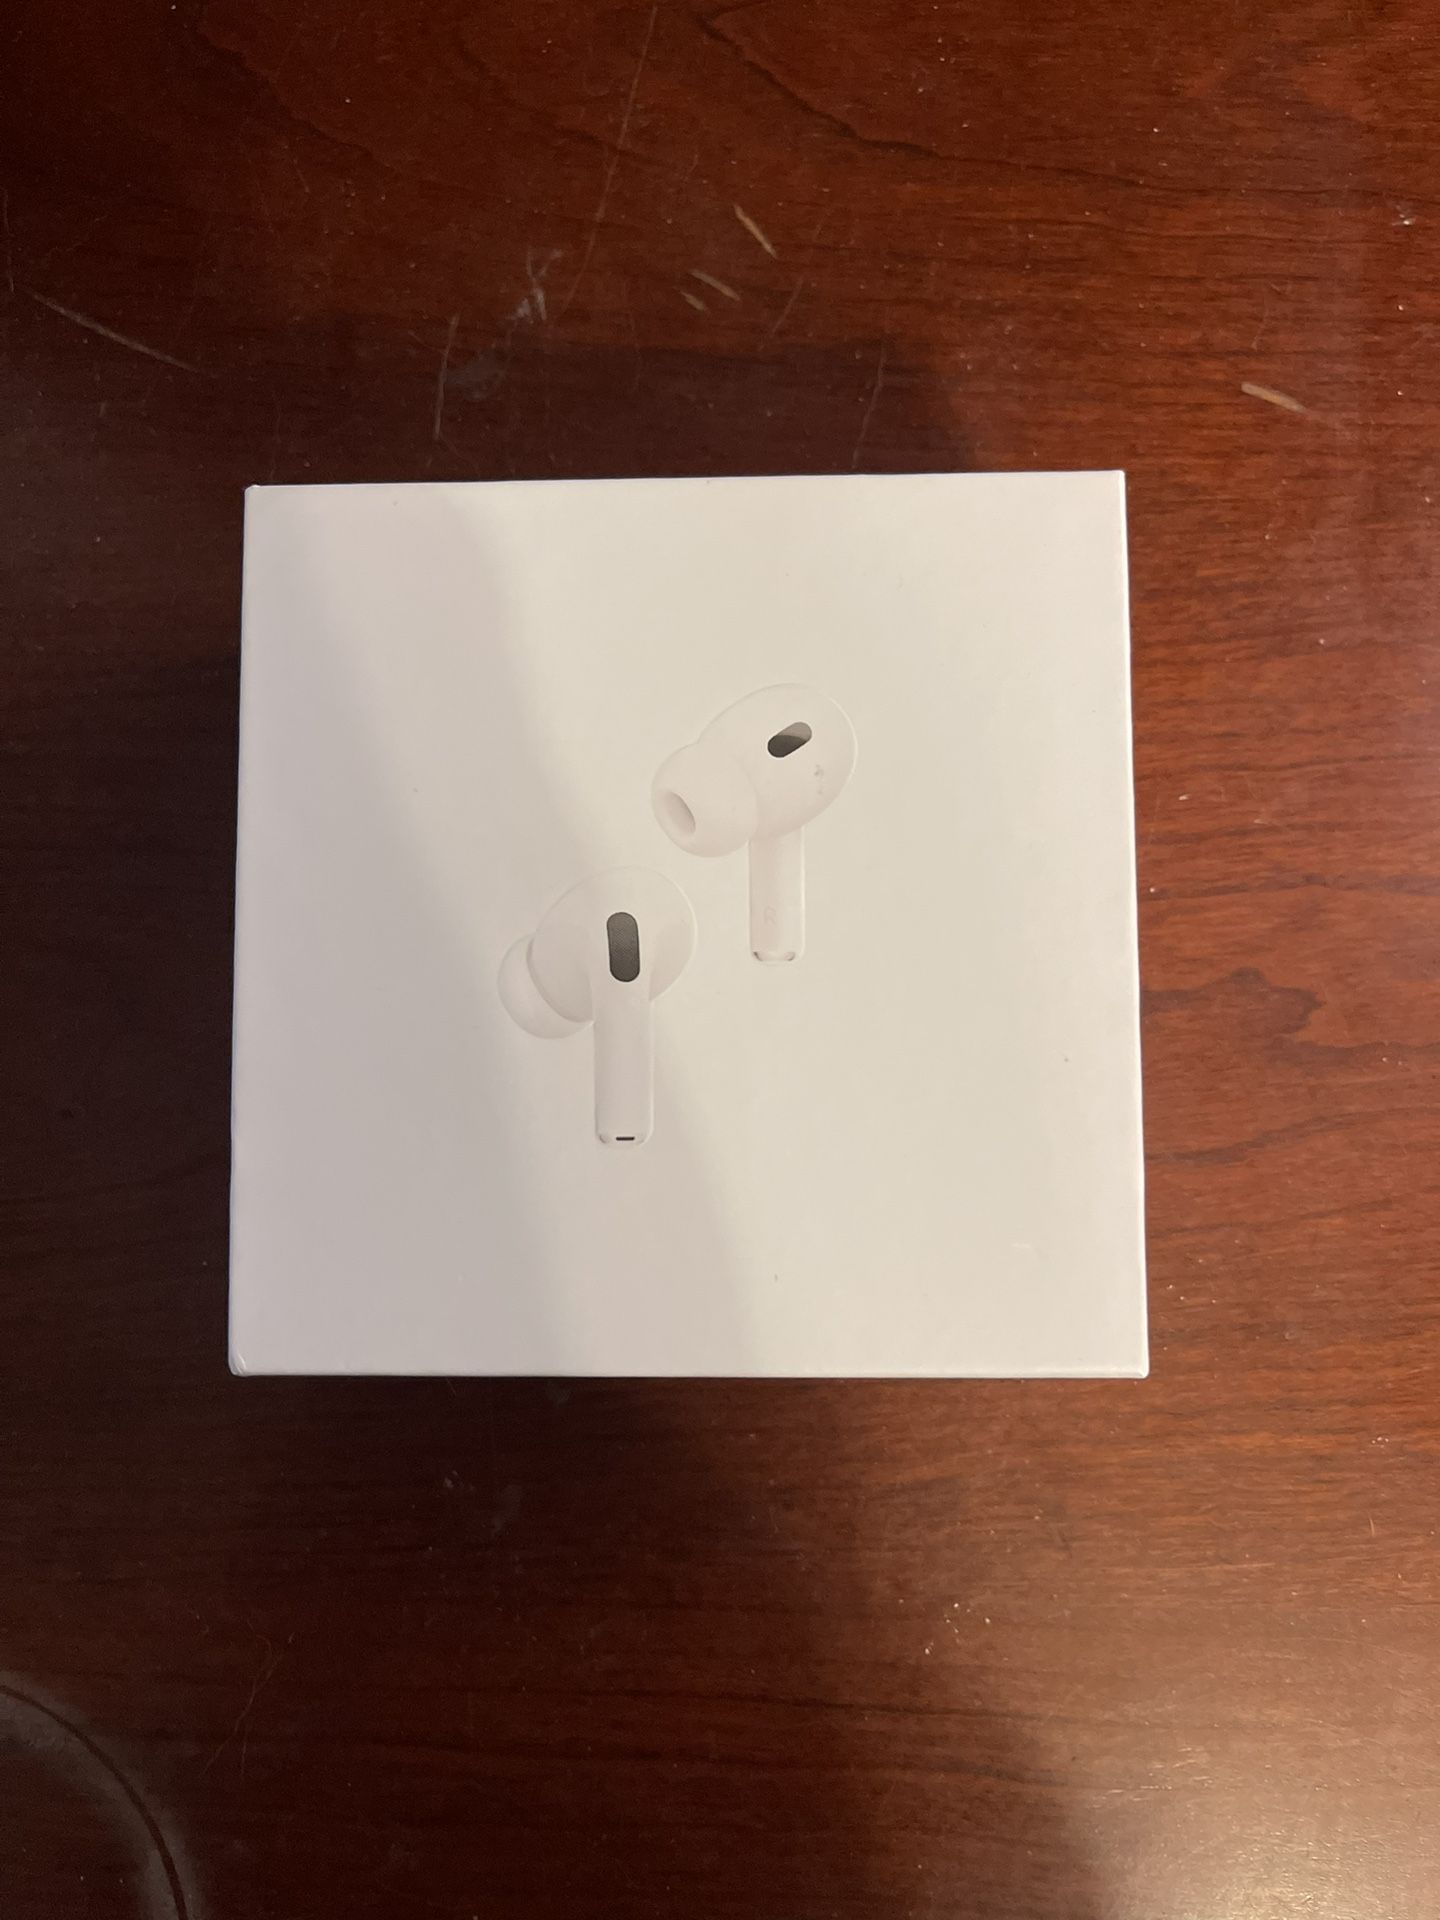 New Apple AirPods Pro’s 2nd Gen  160 obo